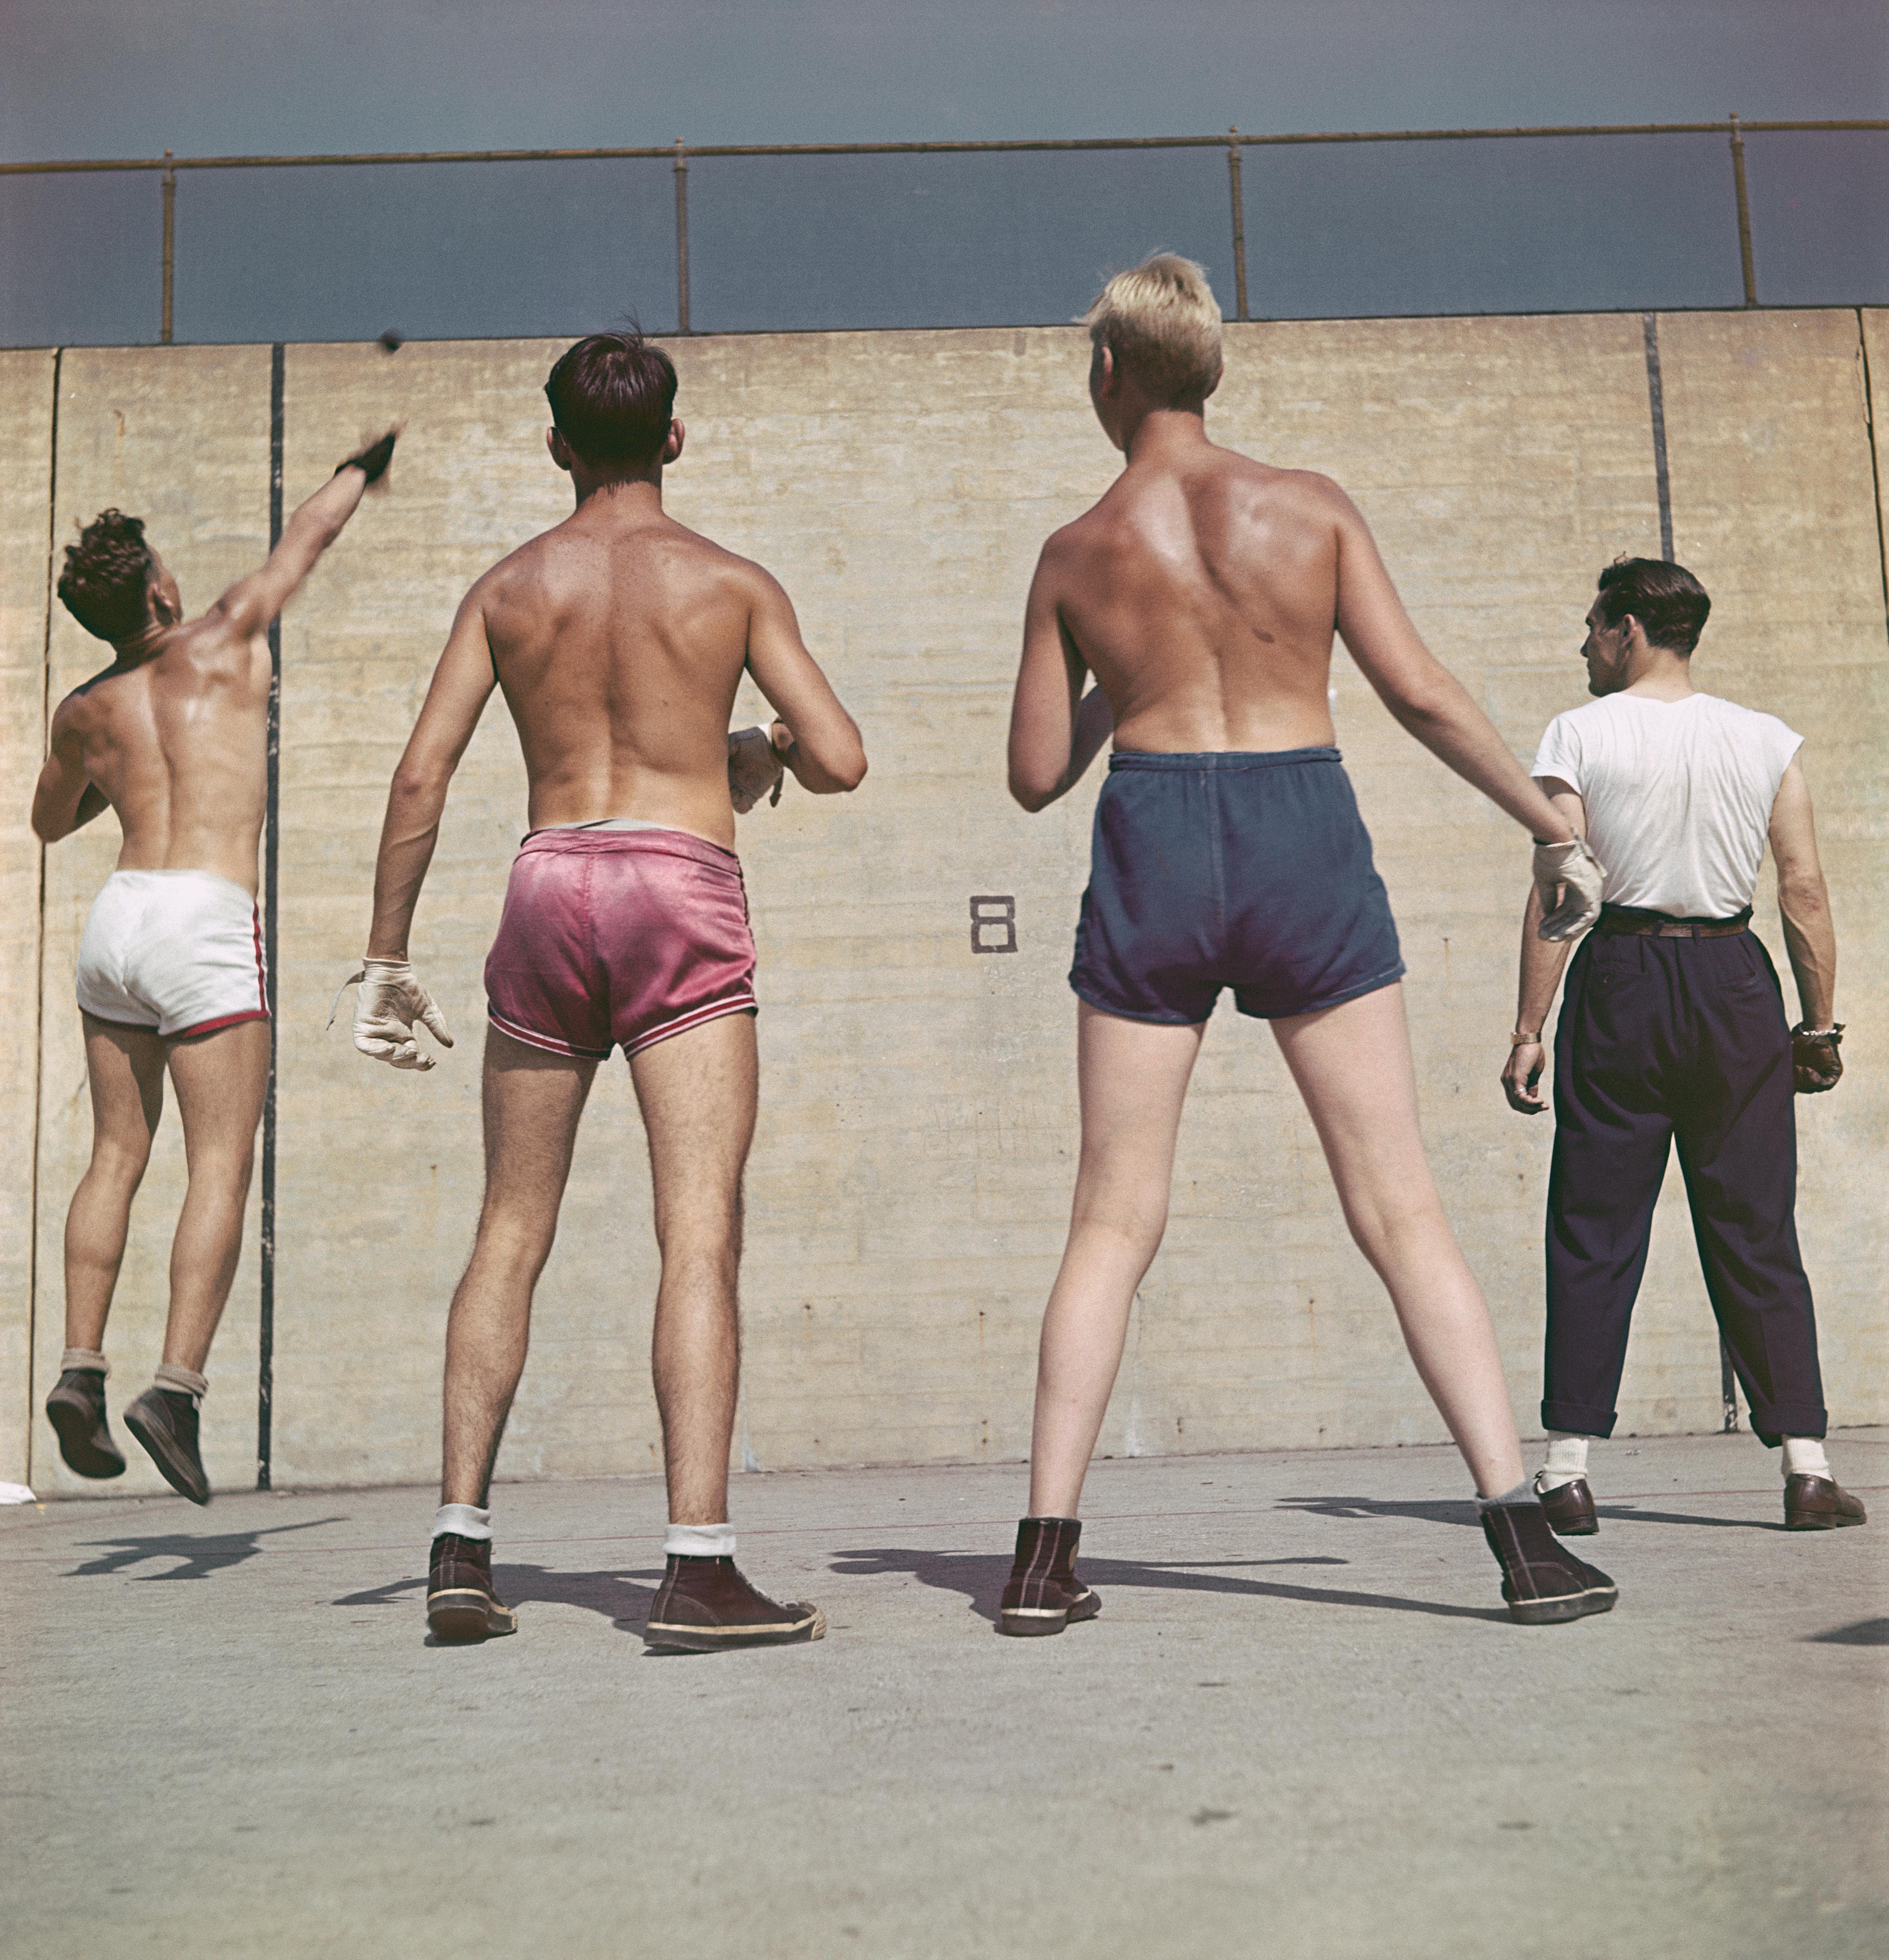 A group of young men playing handball at a court in the 95th Street playground, Central Park, New York City, 1947.

Once a year, we uncover never-before-seen Slim Aarons images! This is one of fifteen from our new collection. A word from our Curator